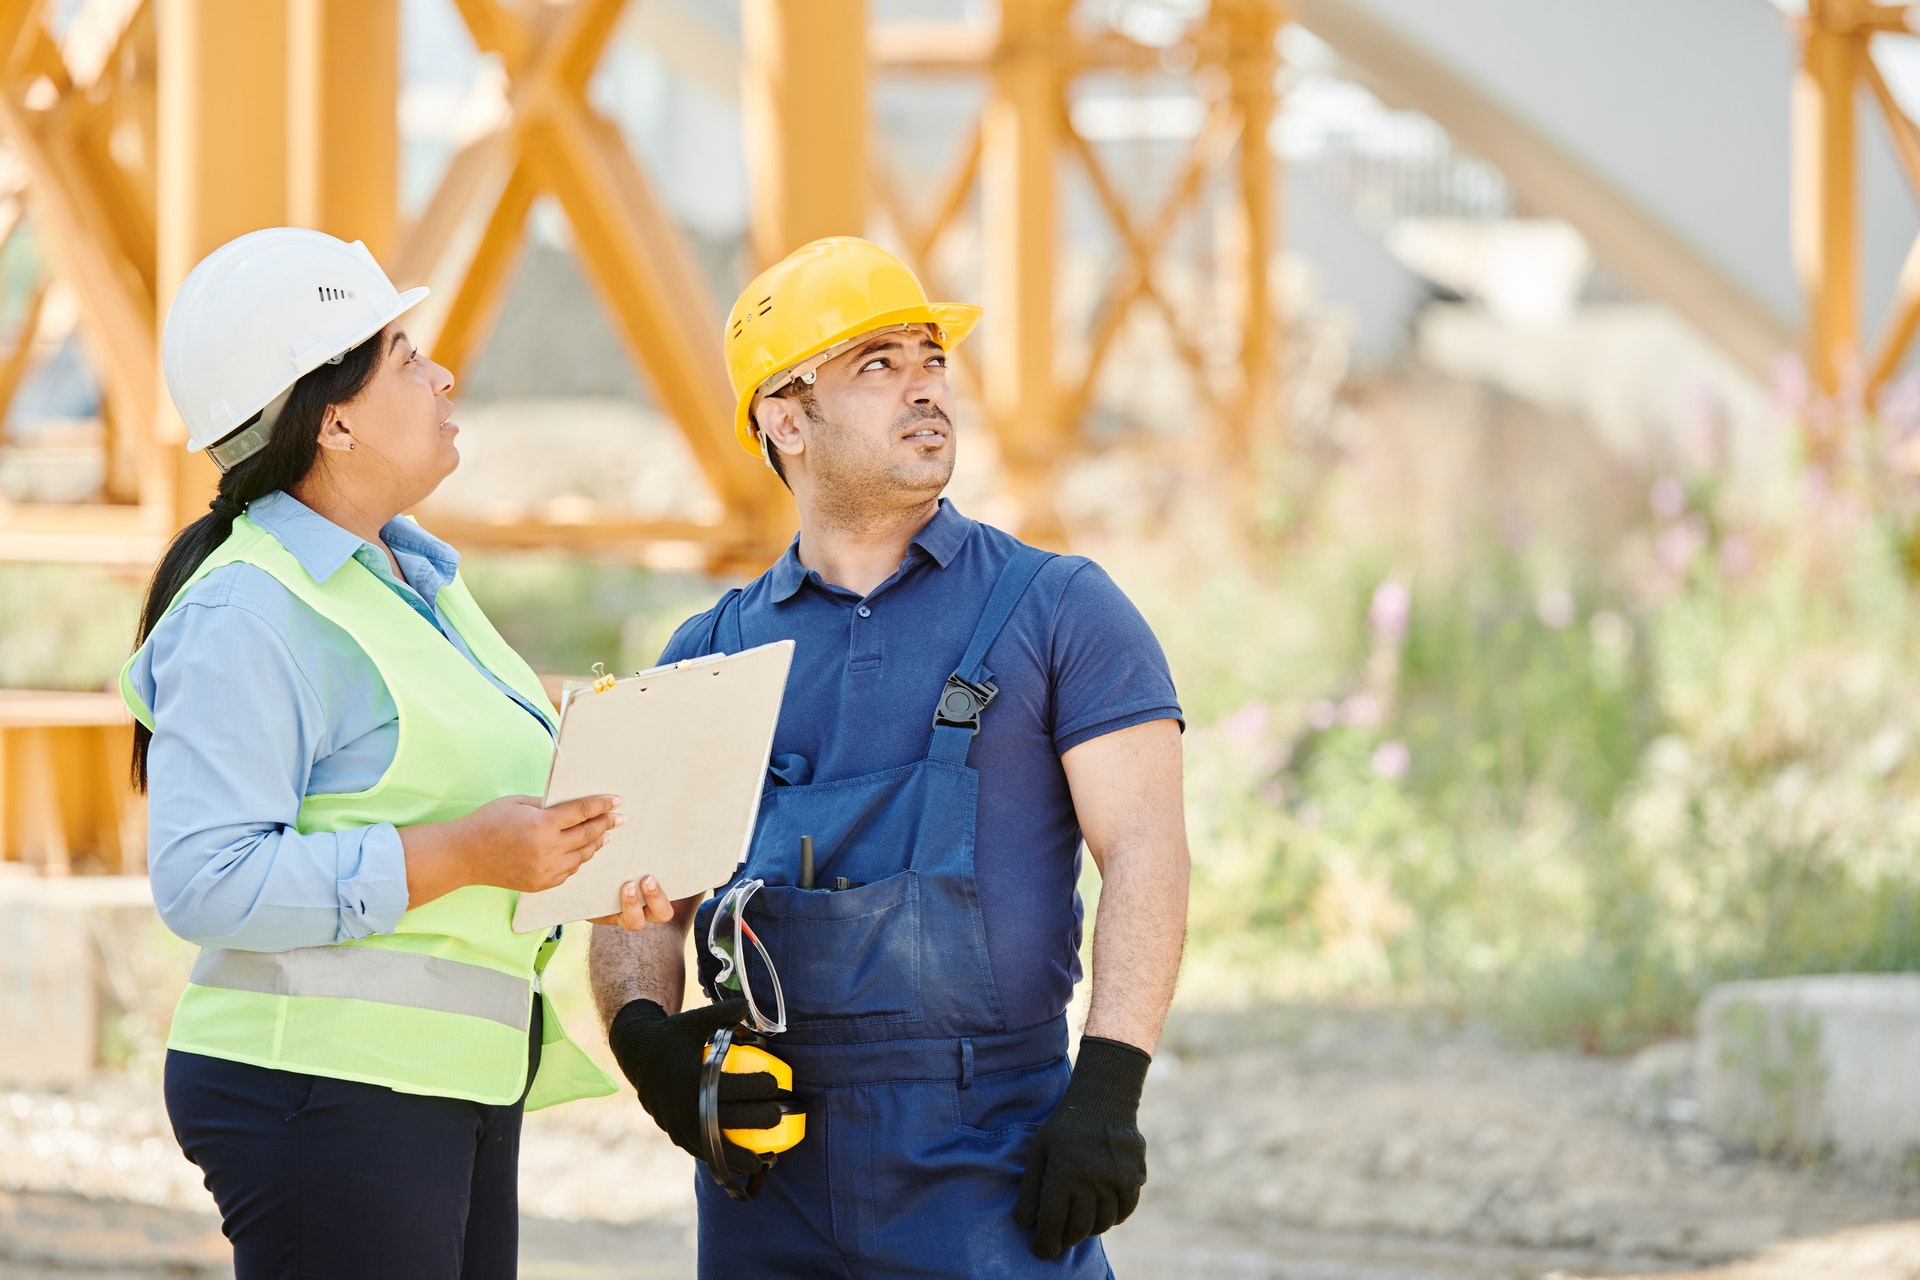 A woman and man wear protective clothing and hard hats at a construction site